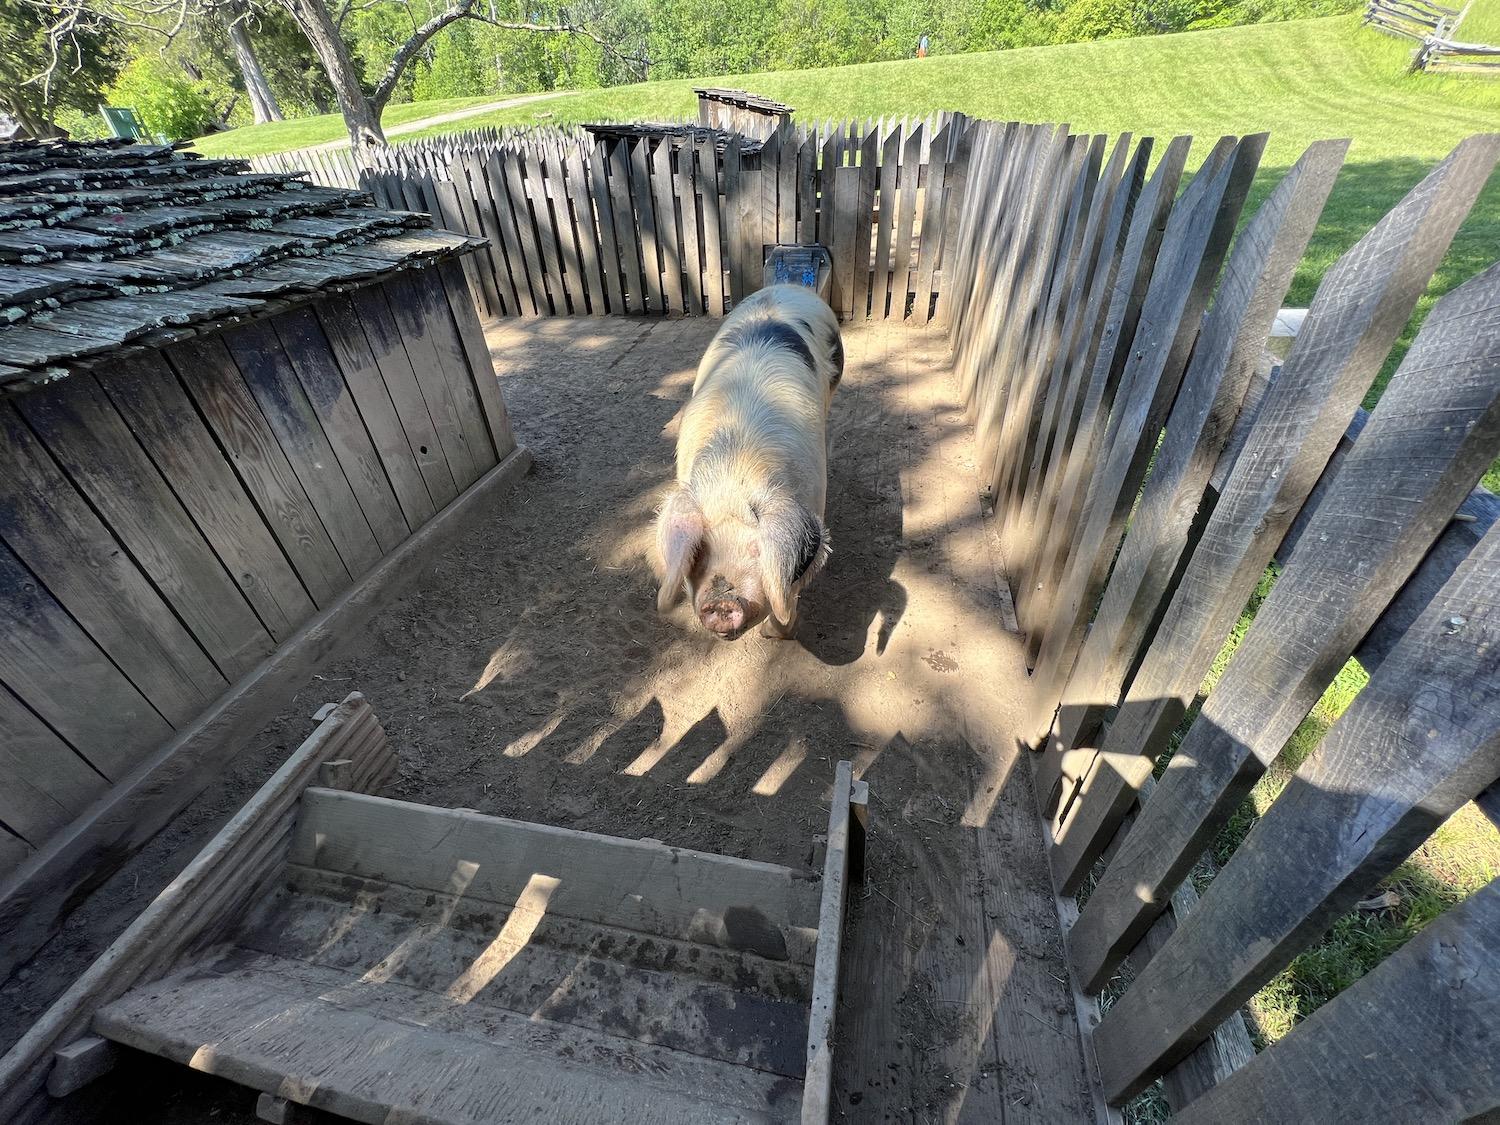 One of the two pigs that lives at Booker T. Washington National Monument, a former tobacco plantation that had 10 enslaved workers.